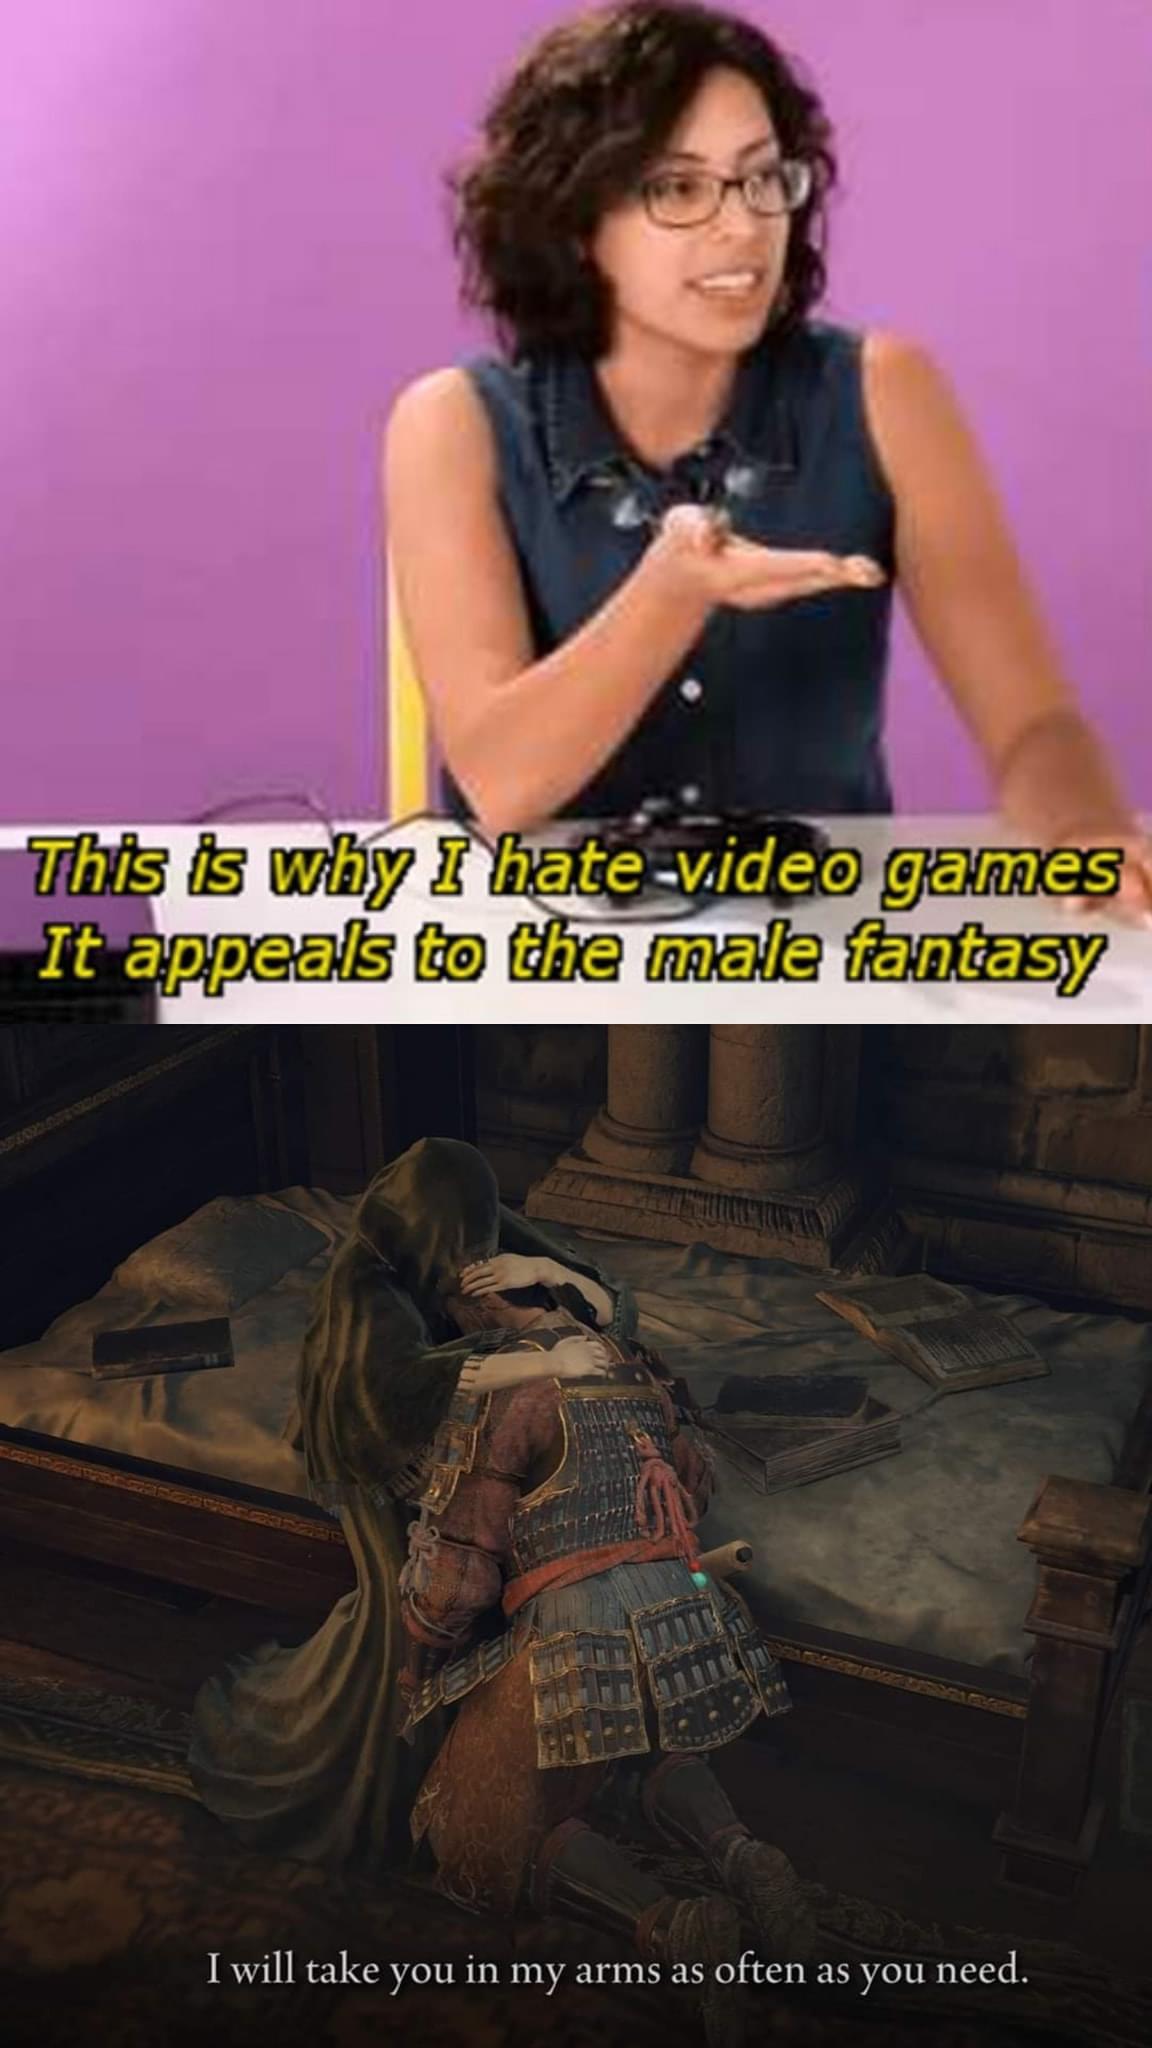 funny gaming memes  - male fantasy memes - This is why I hatevideo games It appeals to the male fantasy I will take you in my arms as often as you need.